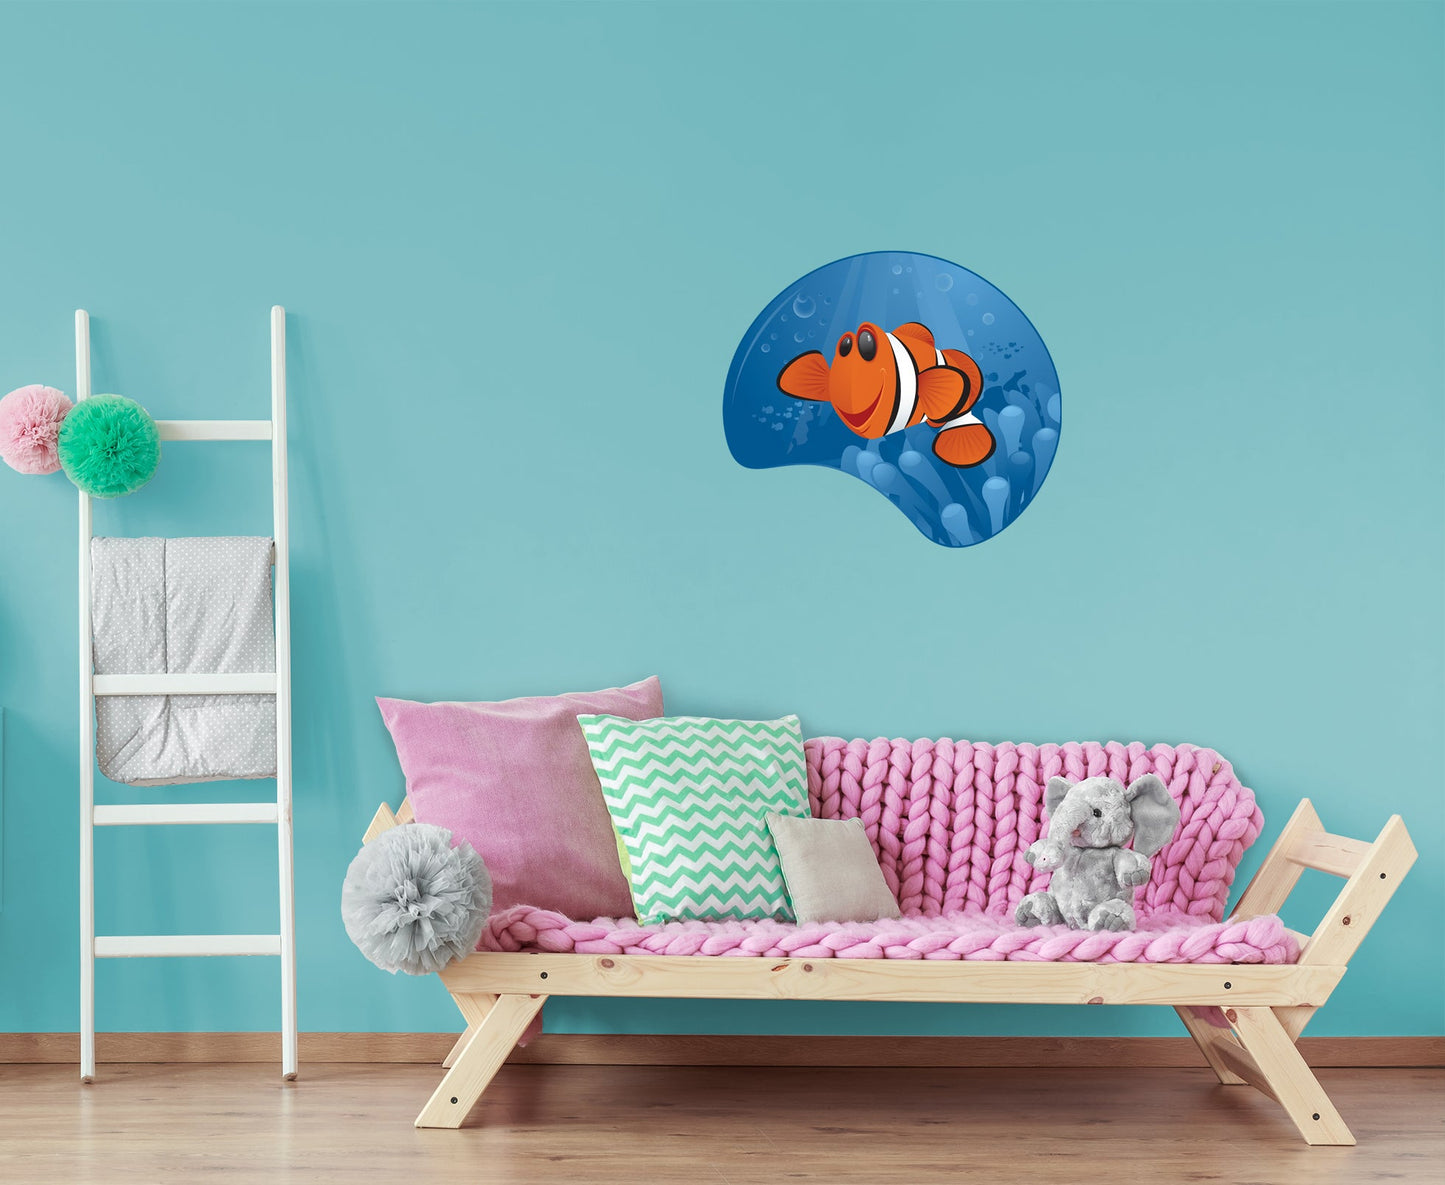 Nursery:  Hello Icon        -   Removable Wall   Adhesive Decal